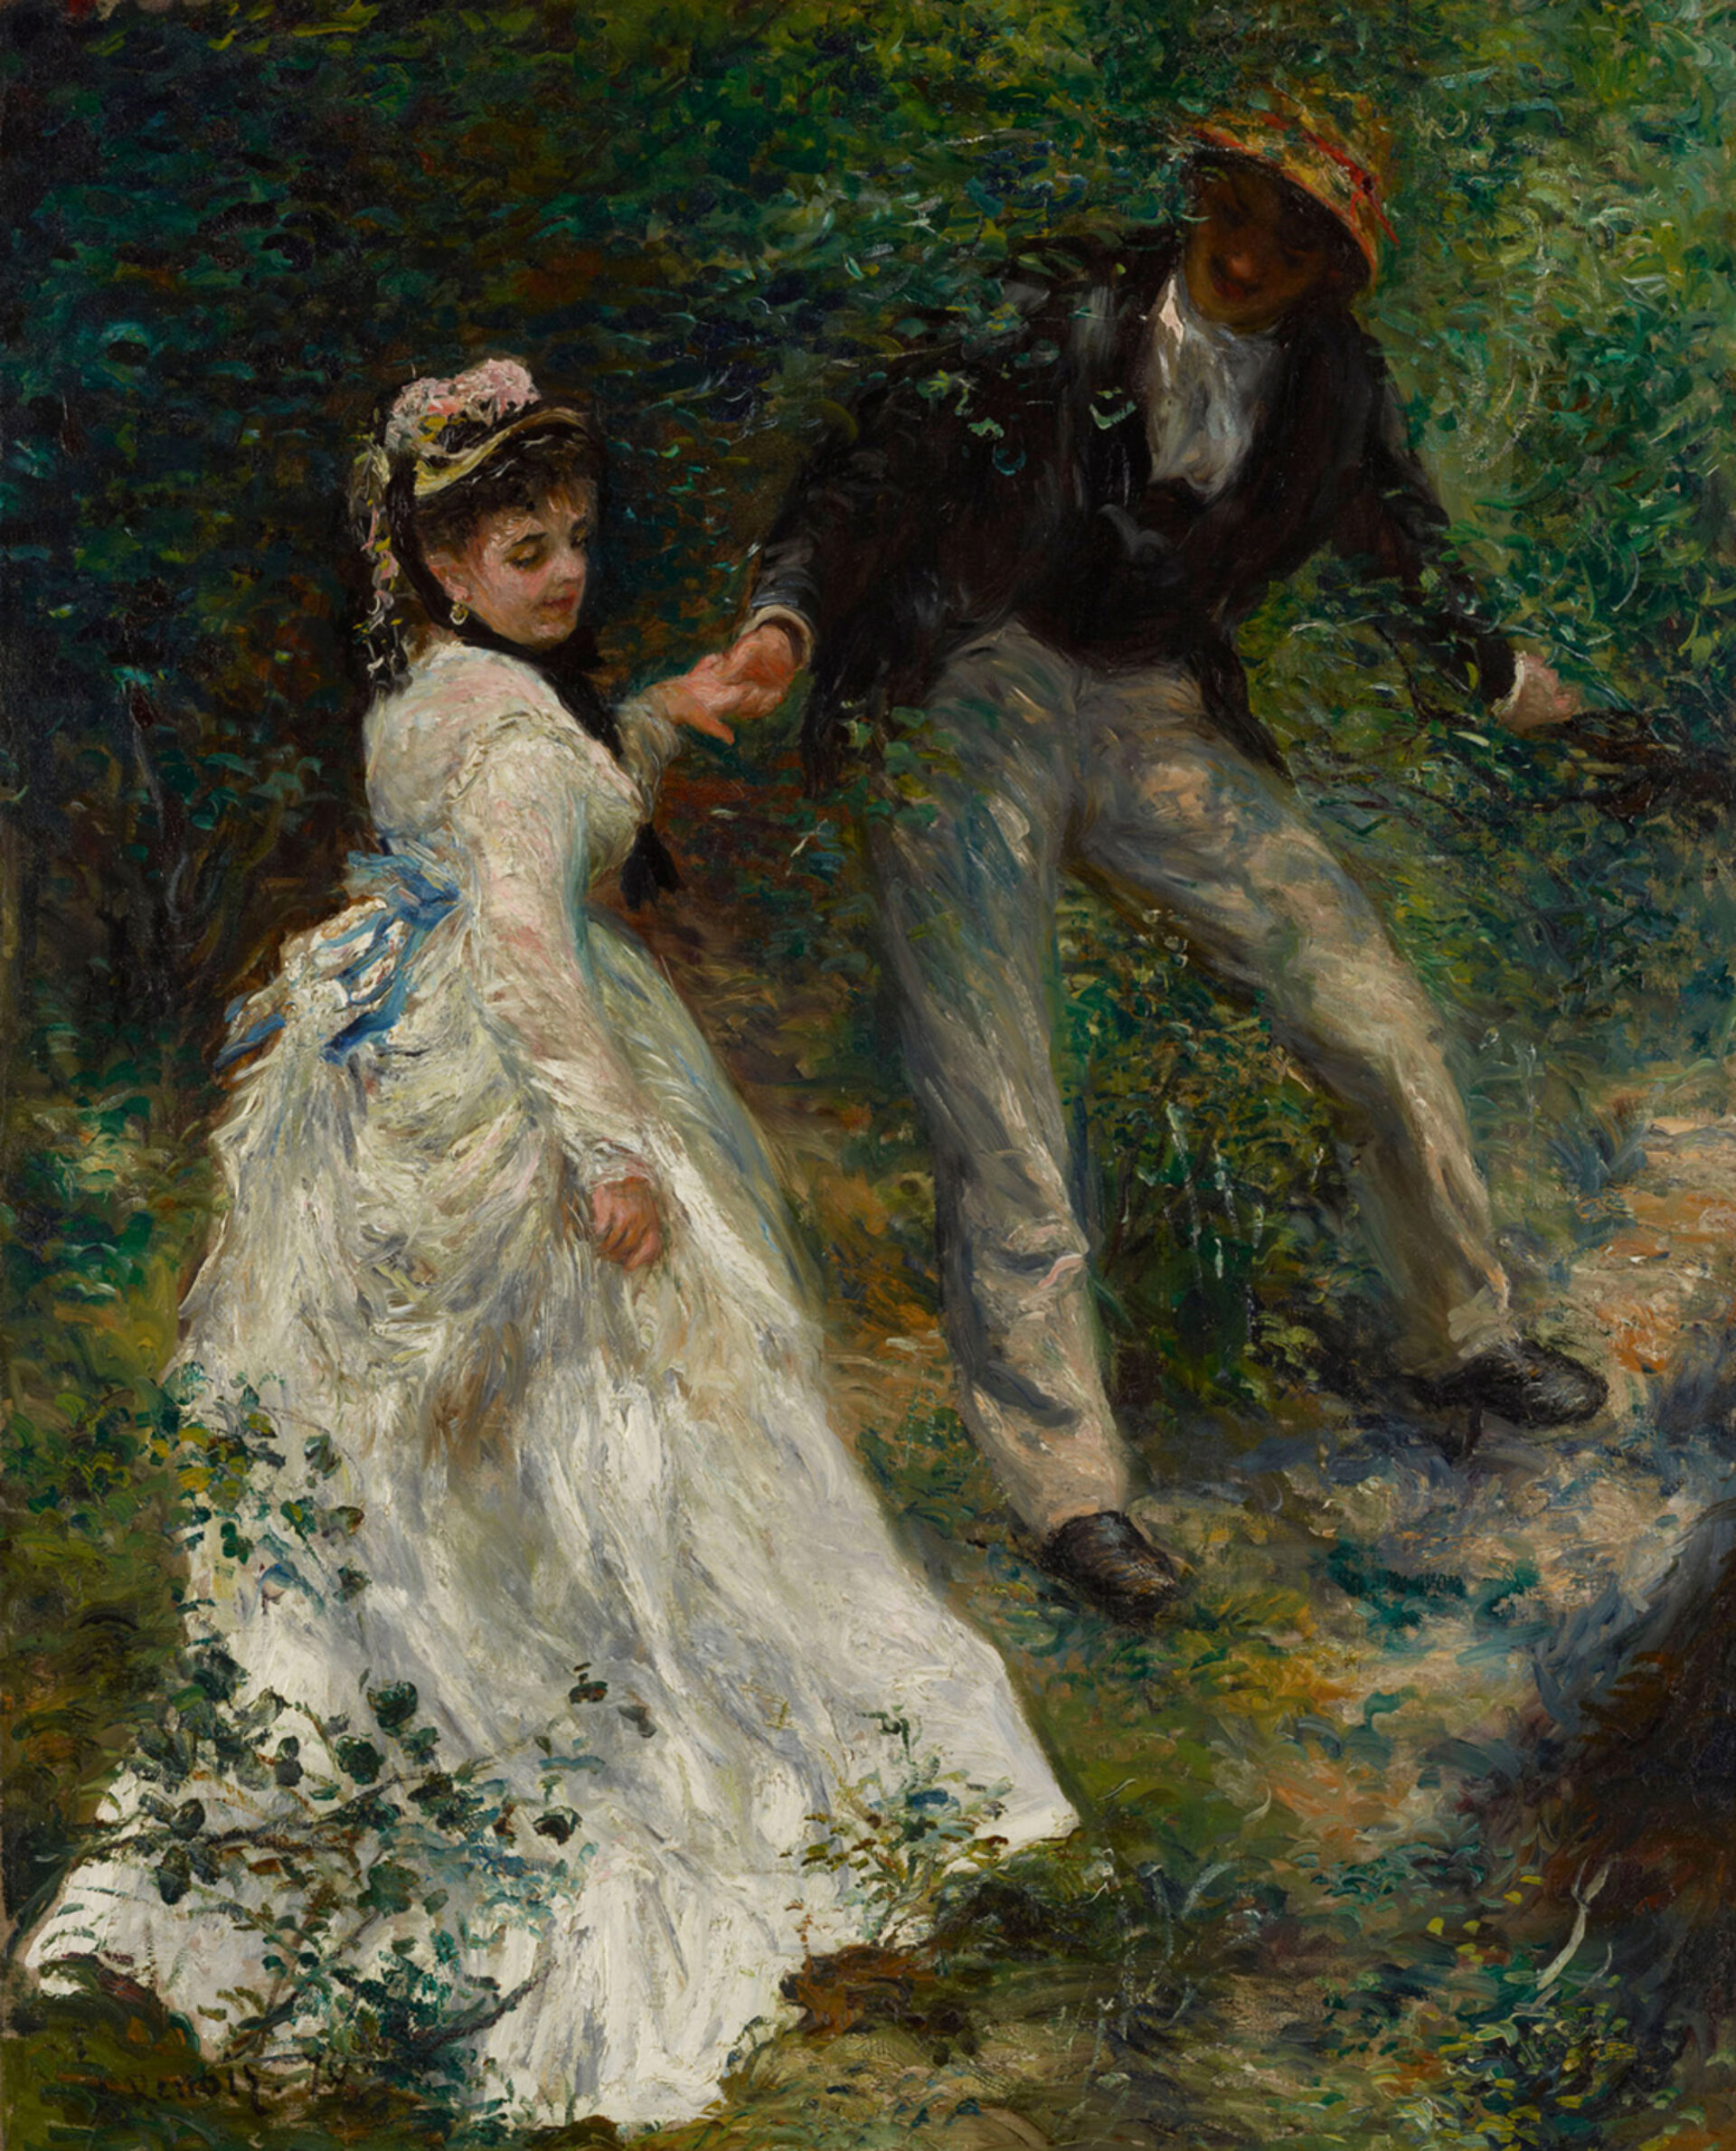 Pierre-Auguste Renoir, Der Spaziergang, 1870, The J. Paul Getty Museum, Los Angeles, Photo Digital image courtesy of the Getty’s Open Content Program